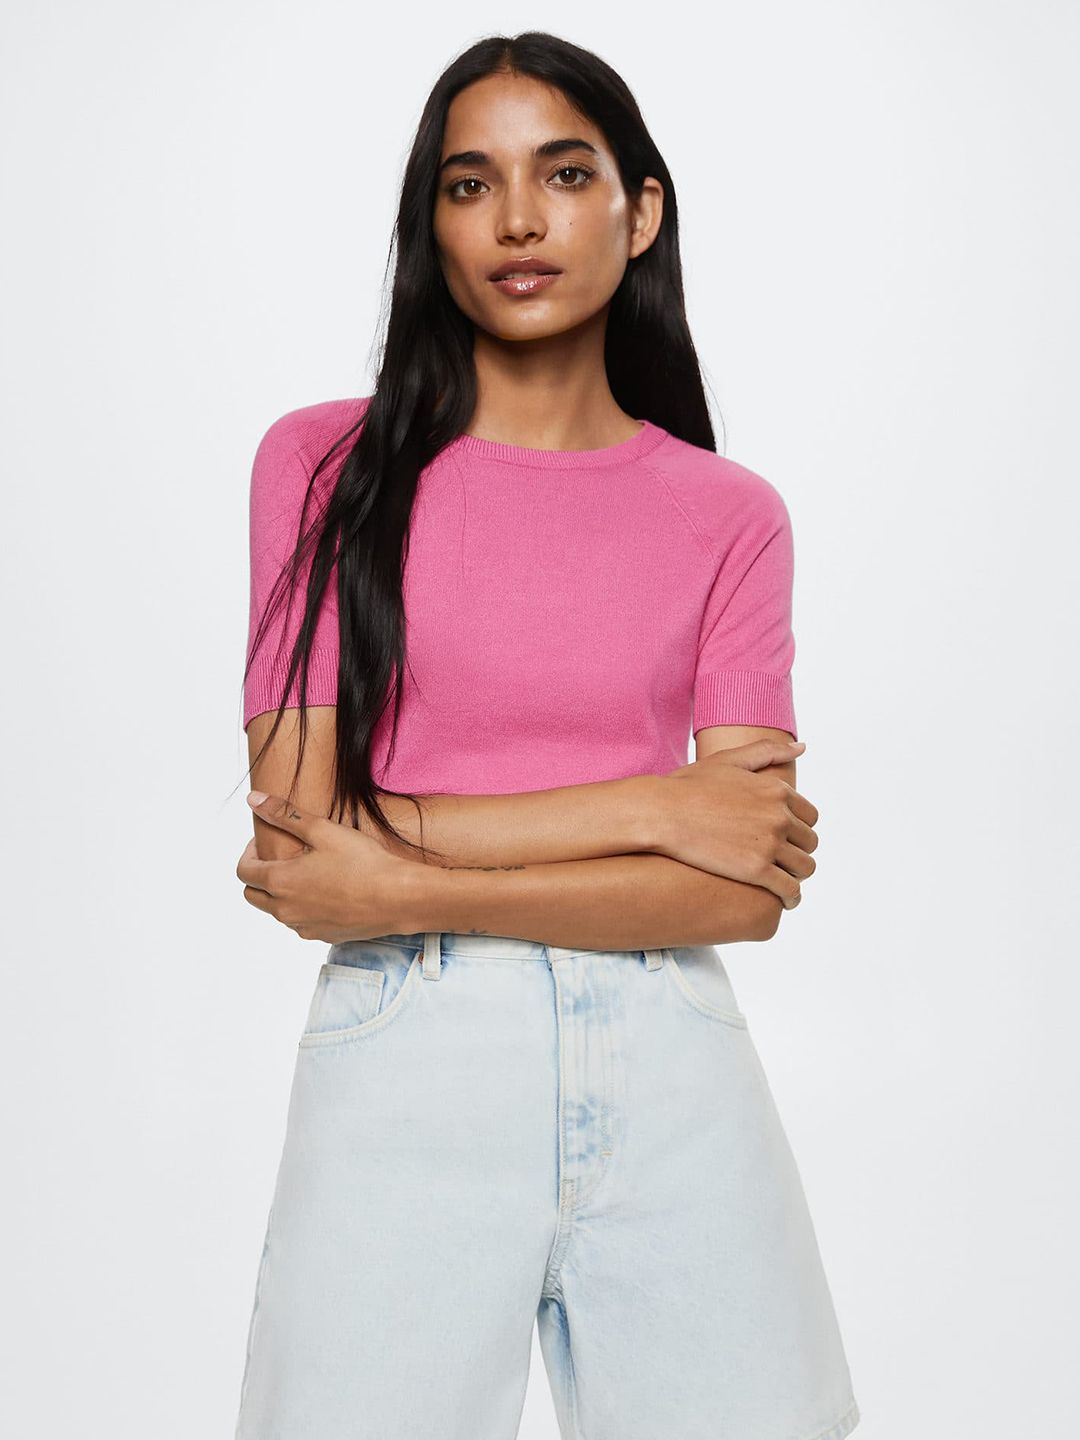 MANGO Women Pink Solid Top Price in India